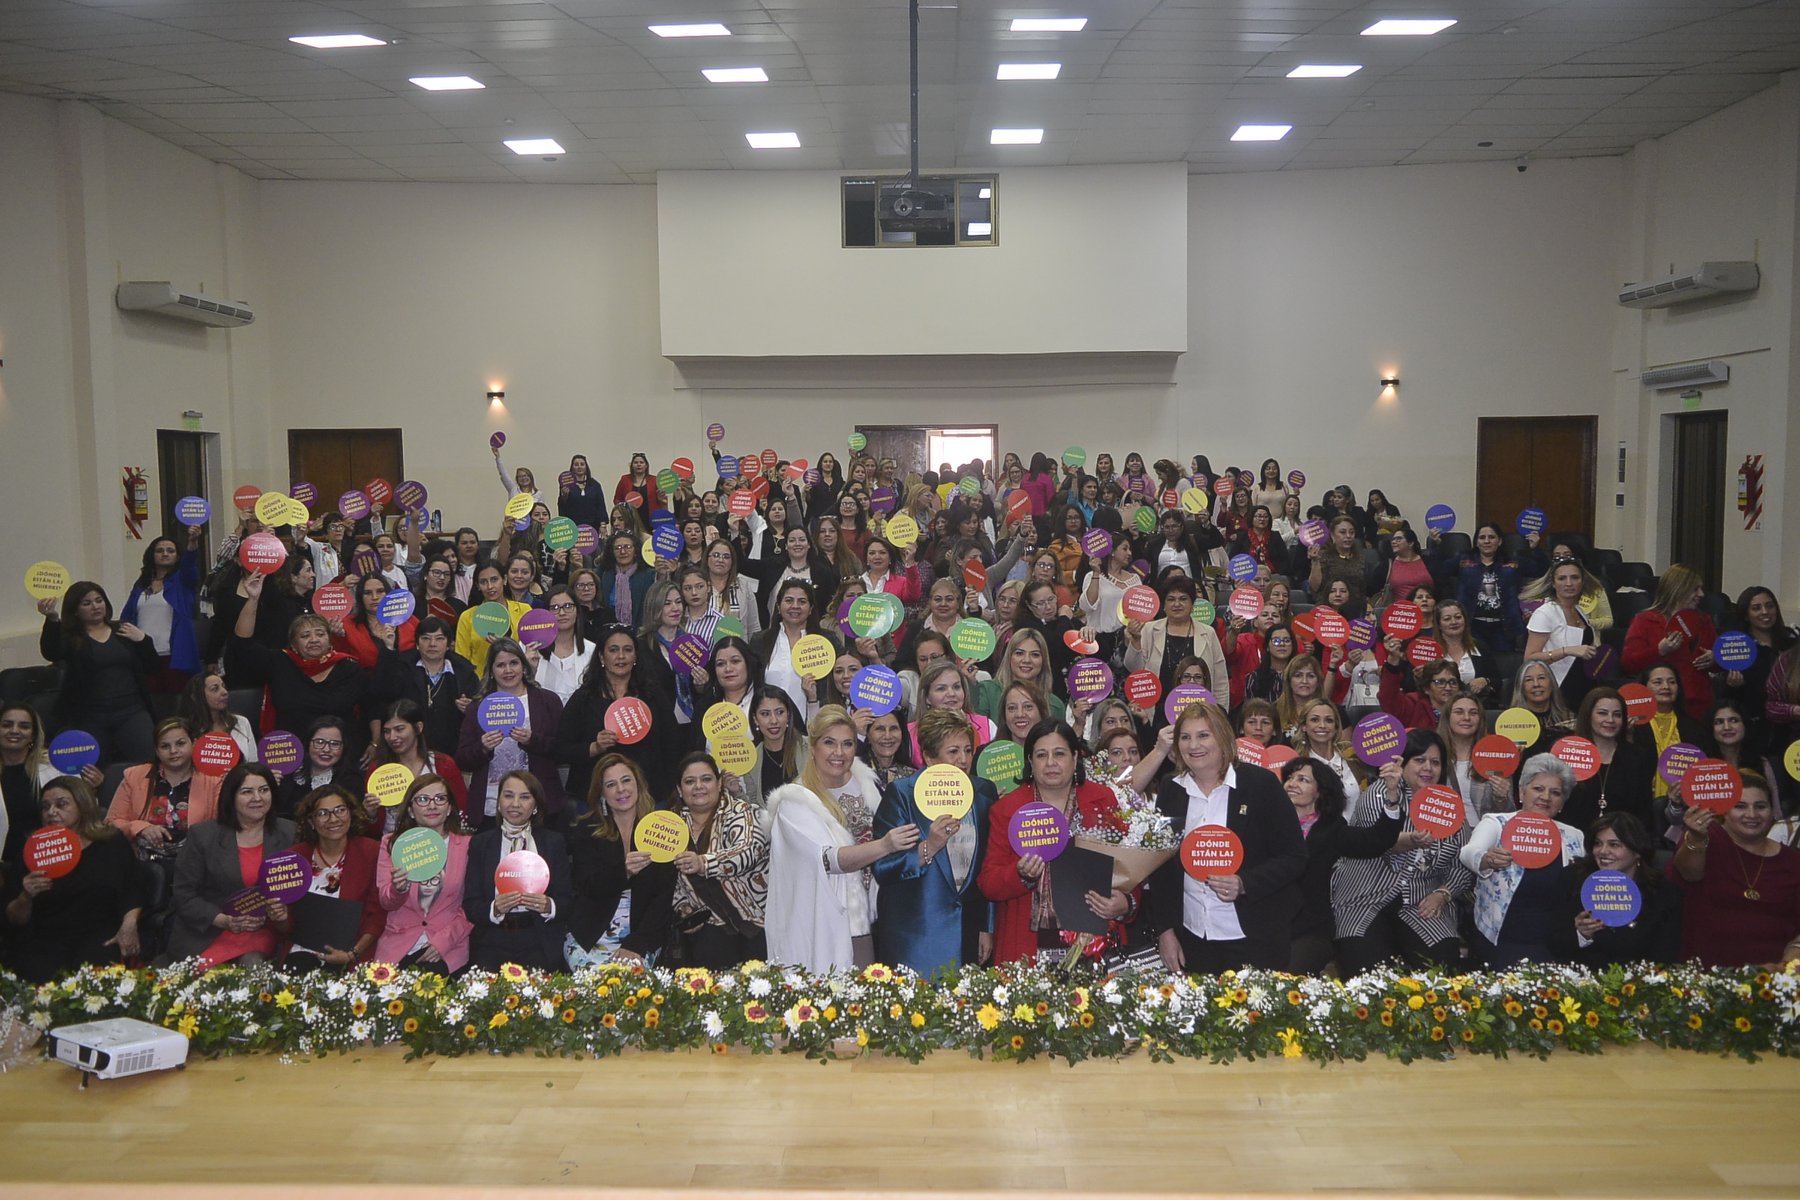 A meeting of women’s networks in Paraguay, 24 August 2019. Photo credit: International IDEA